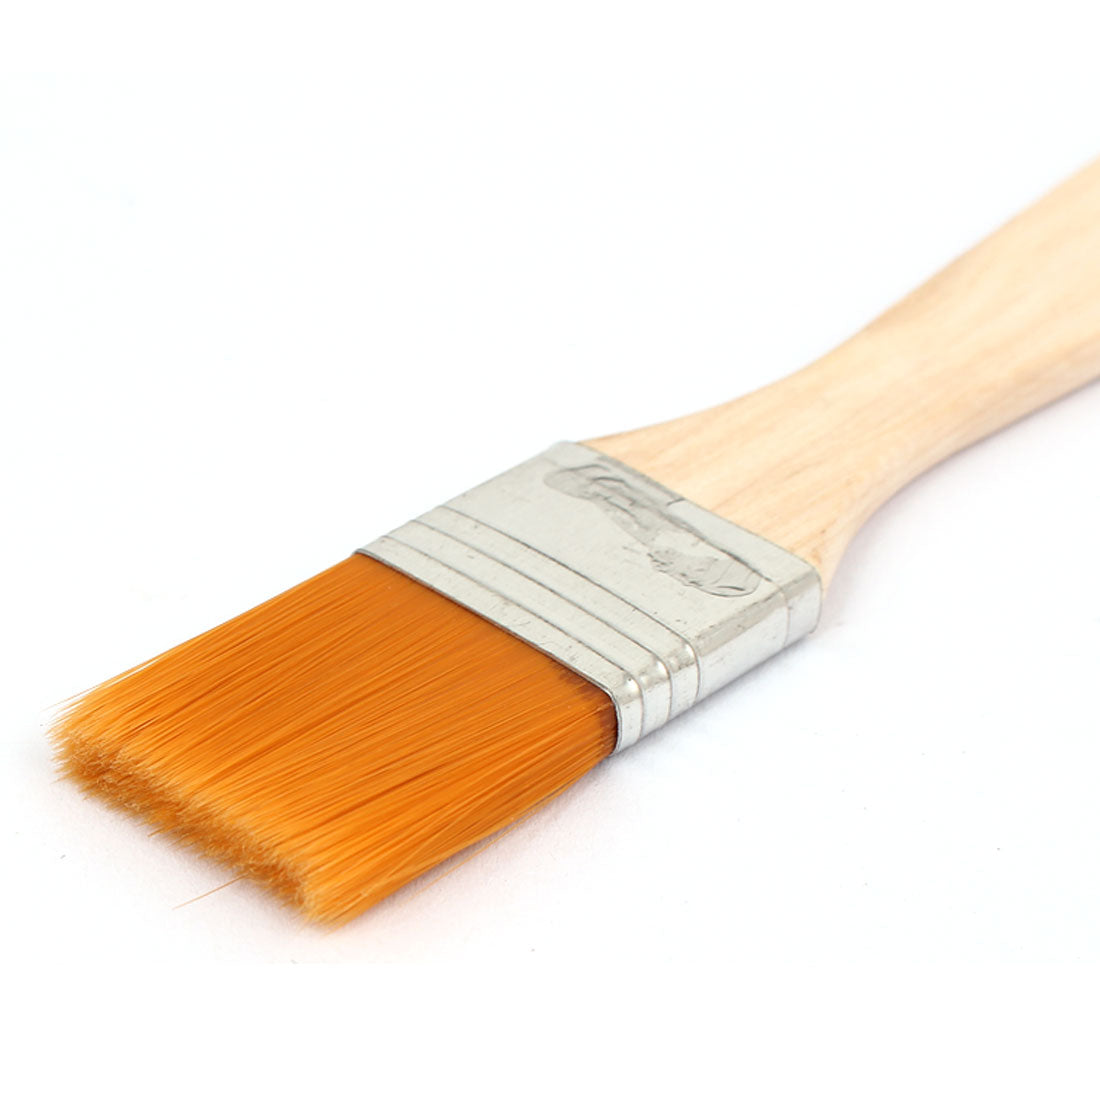 uxcell Uxcell 135mm x 22mm Wood Handle Paint Brush Paintbrush Orange for Painter